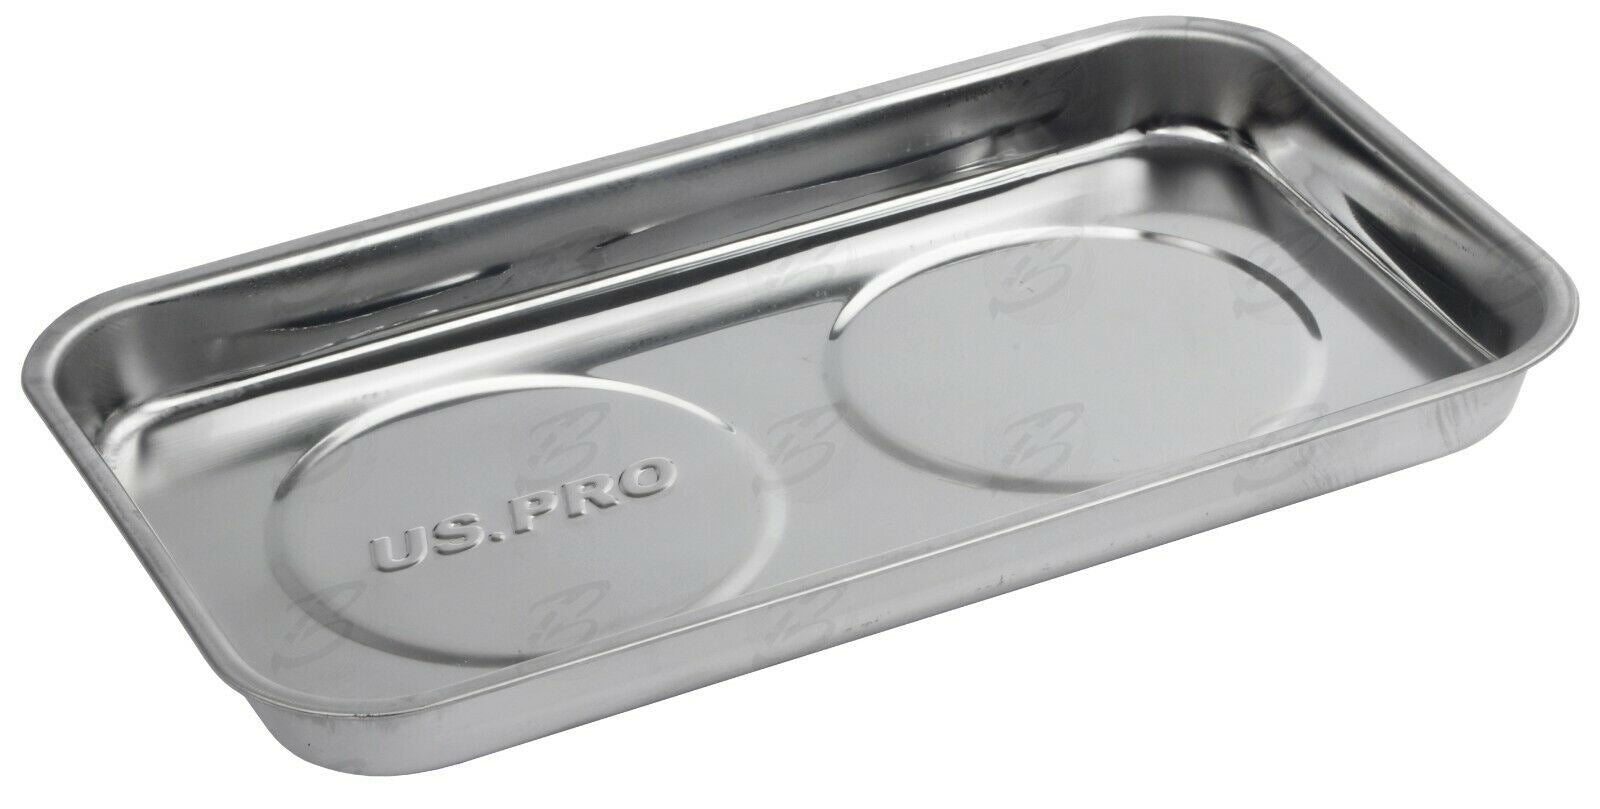 US PRO 9" STAINLESS STEEL DOUBLE MAGNETIC PARTS TRAY